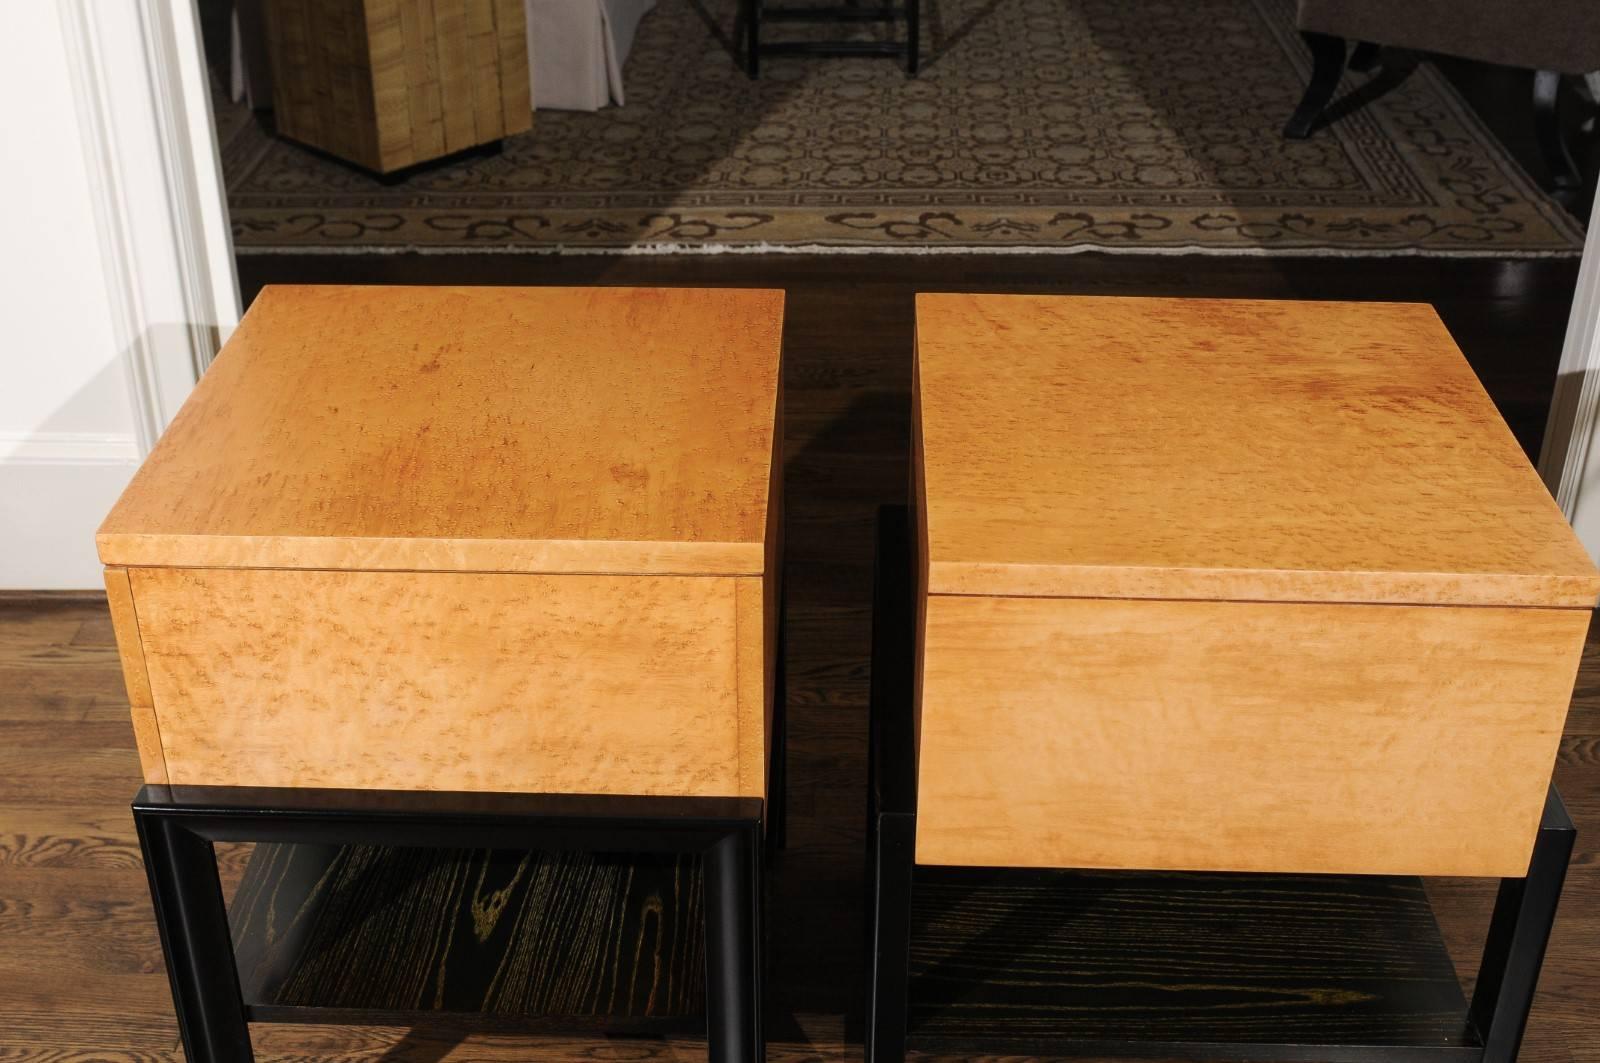 Magnificent Pair of End Tables by Renzo Rutili in Birdseye Maple, circa 1955 For Sale 5